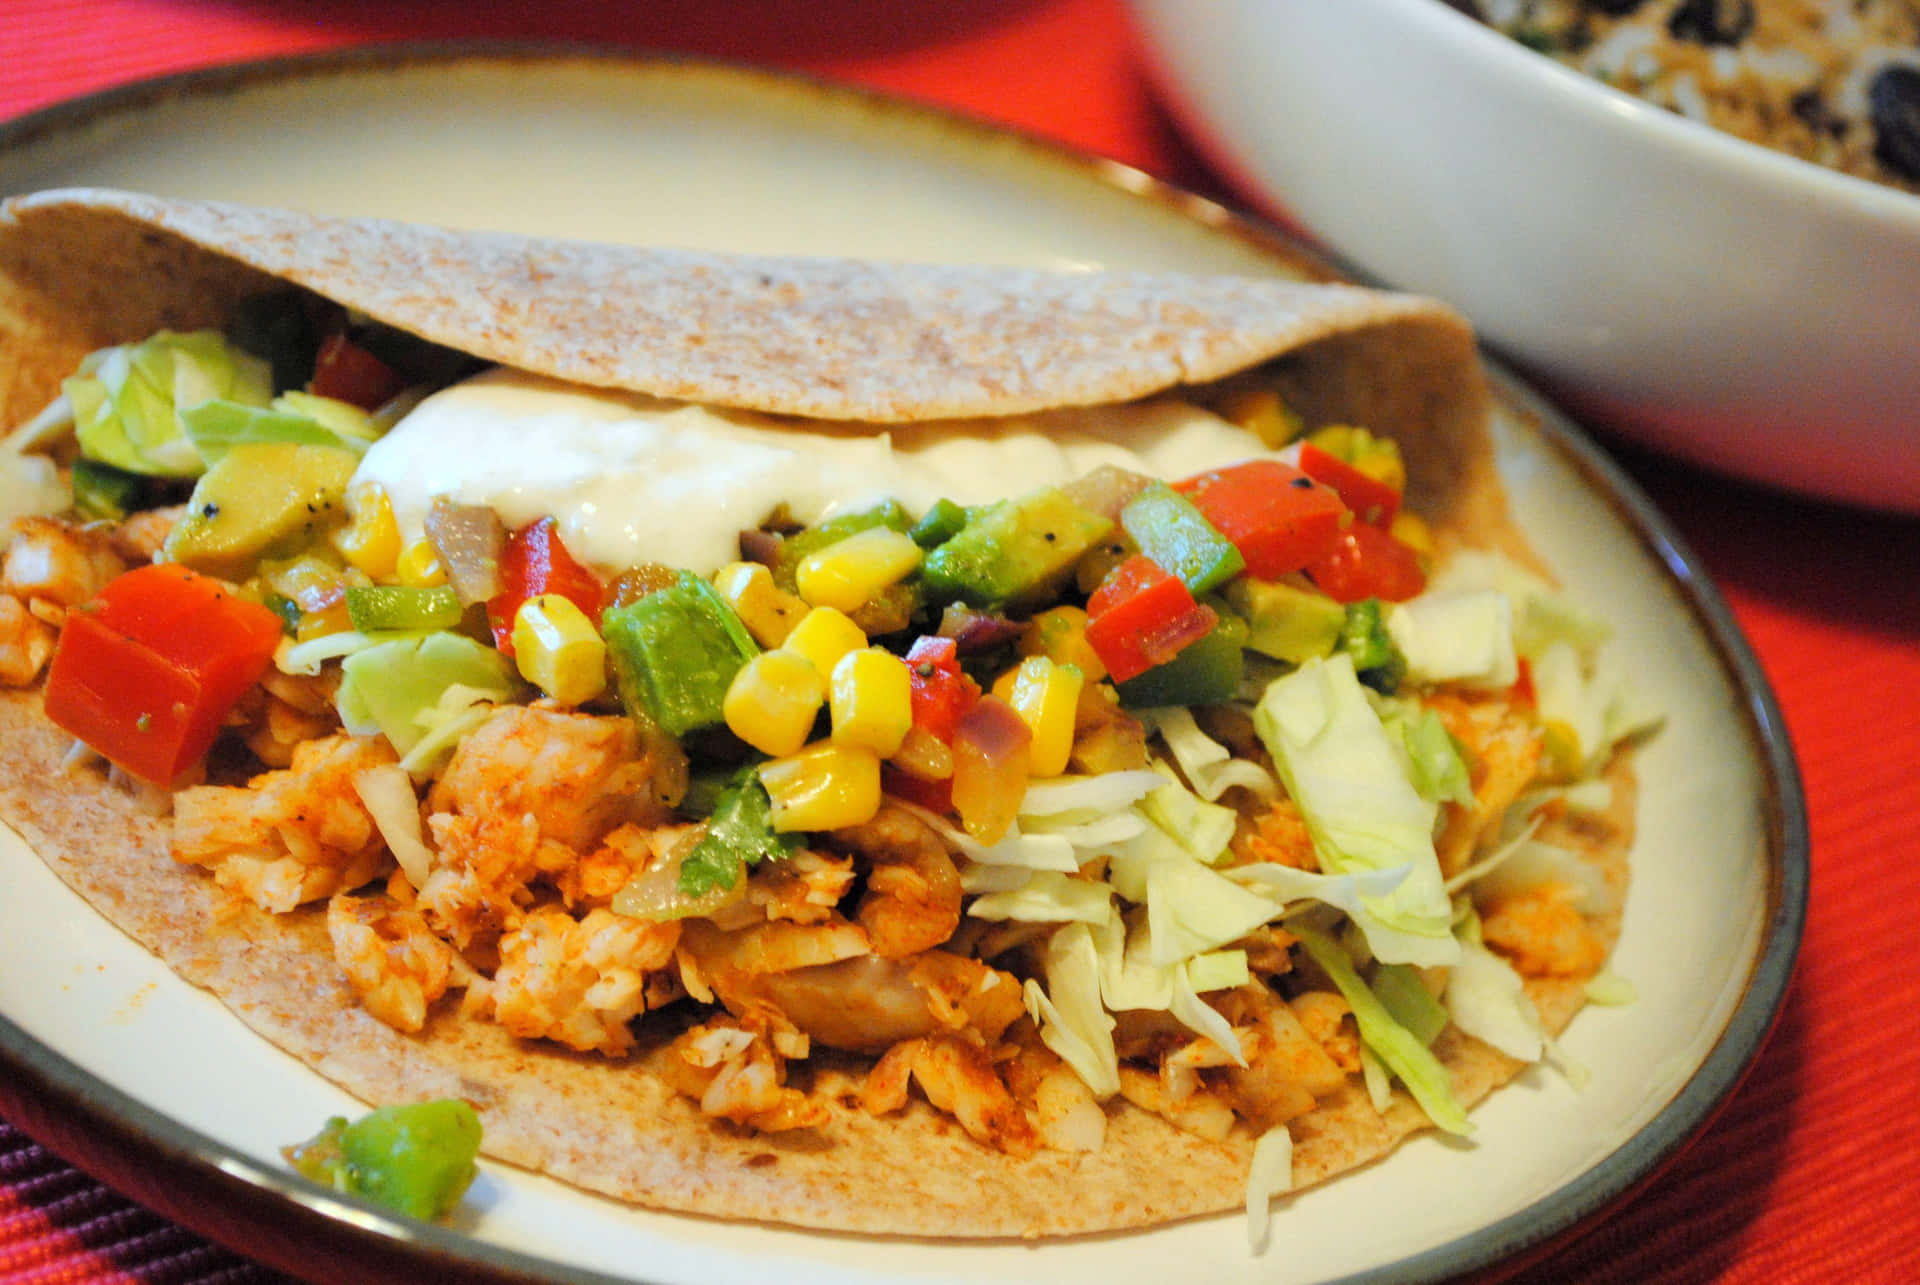 Get ready for a delicious taco dish!